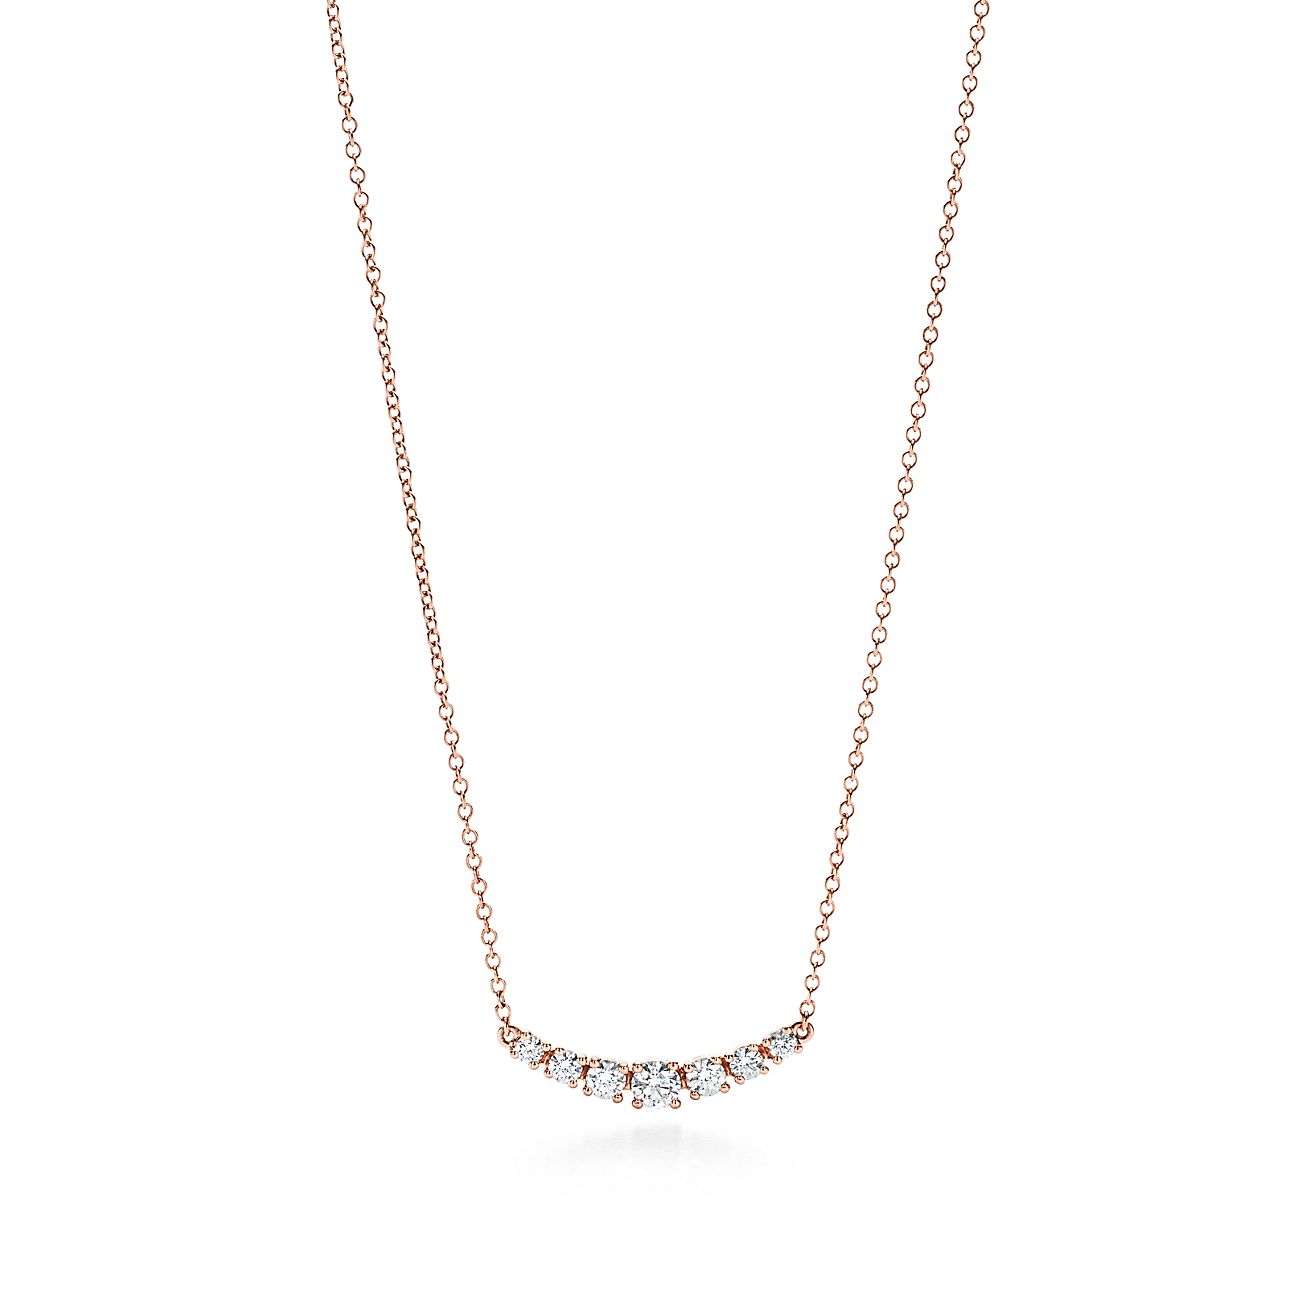 East-west pendant in 18k rose gold with 